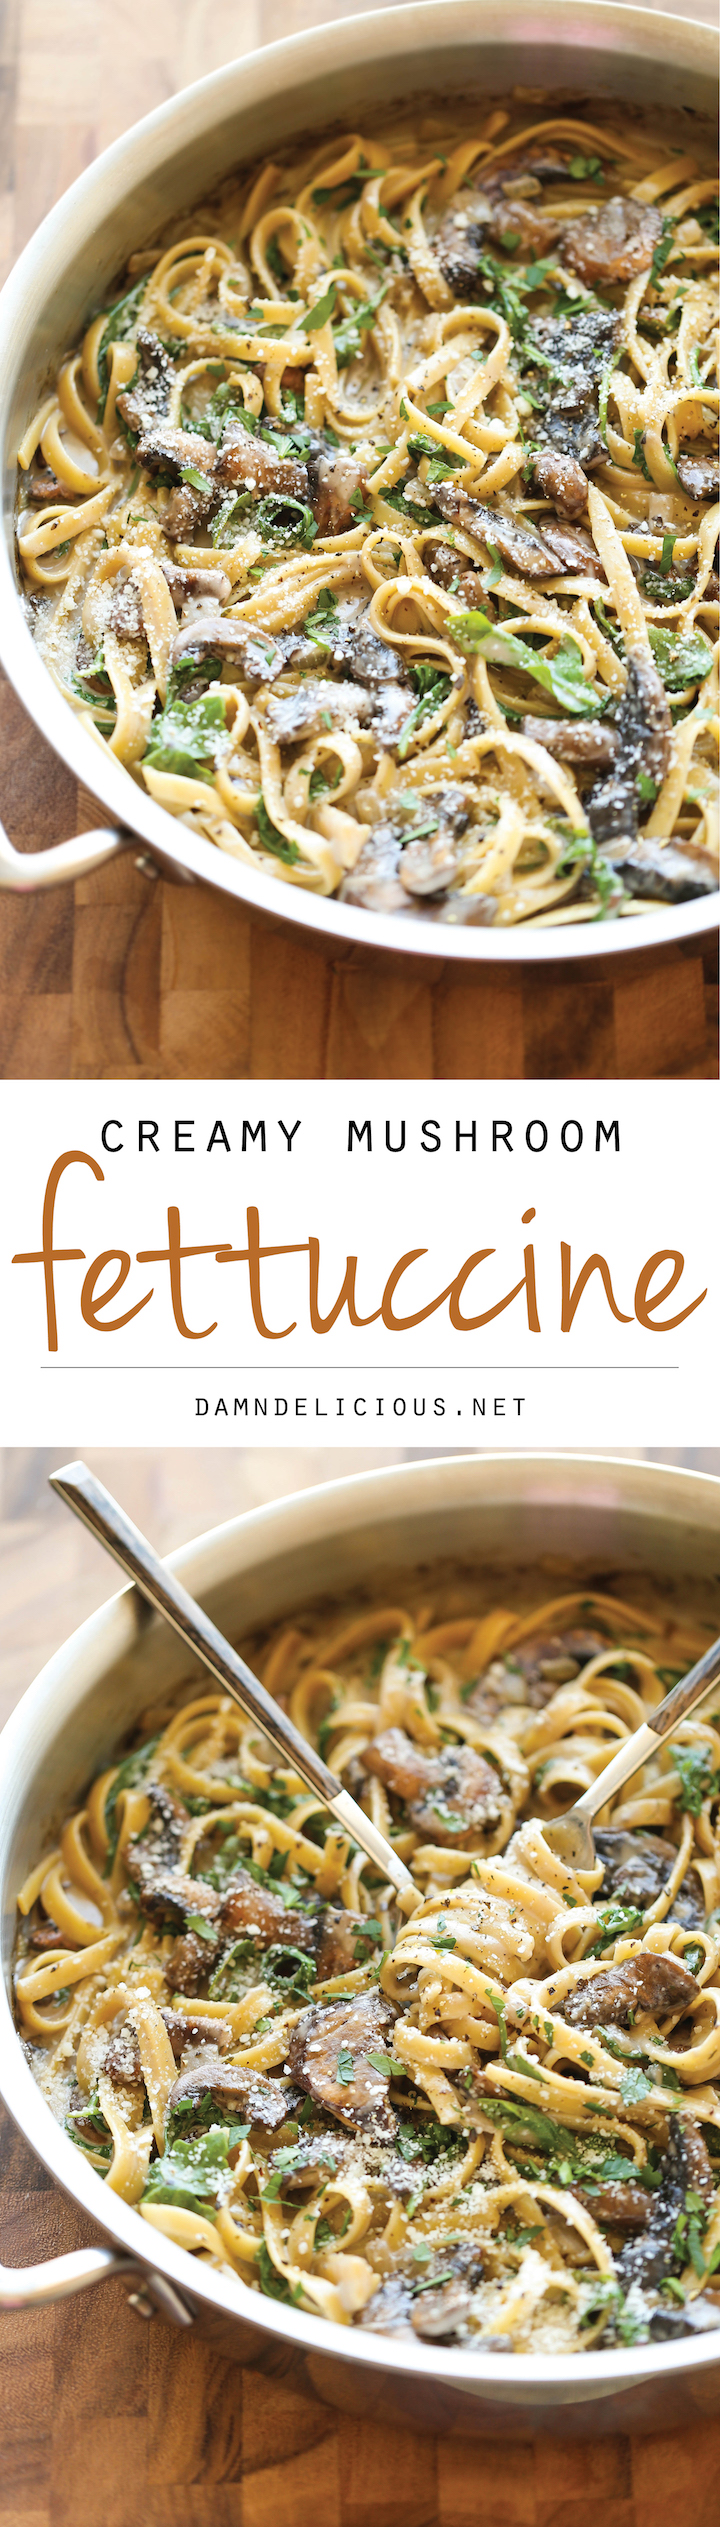 Creamy Mushroom Fettuccine - The creamiest mushroom alfredo sauce you will ever have - a sauce so good, you'll want to slurp it with a spoon!